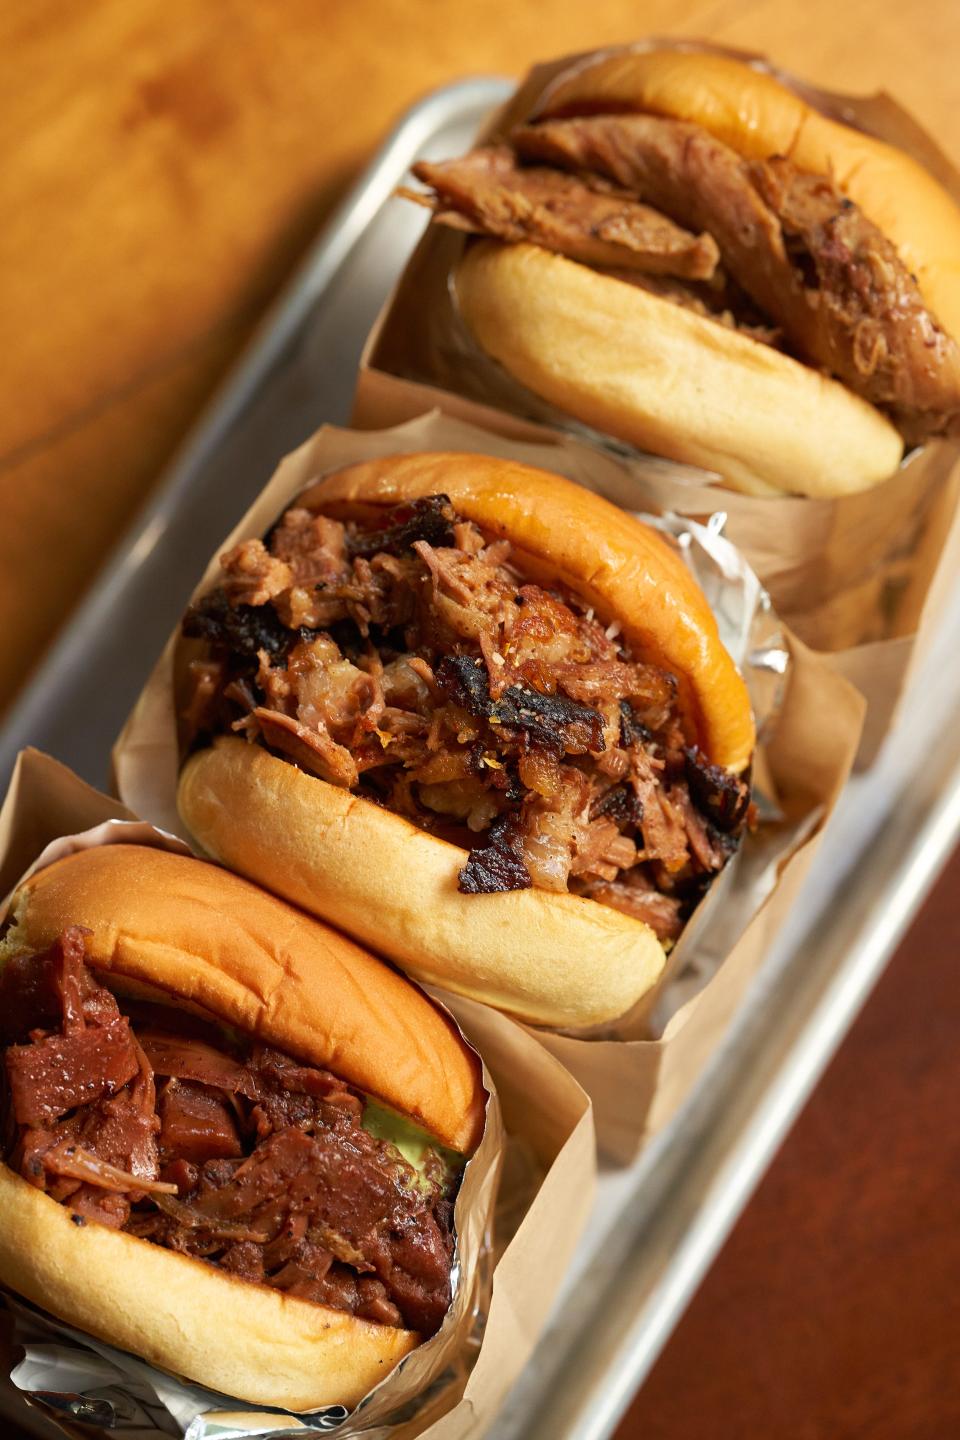 Tropical BBQ Market, in downtown West Palm Beach, will be offering free pulled pork sandwiches on Wednesday, Dec. 20 with a donation to the National Alliance on Mental Illness.